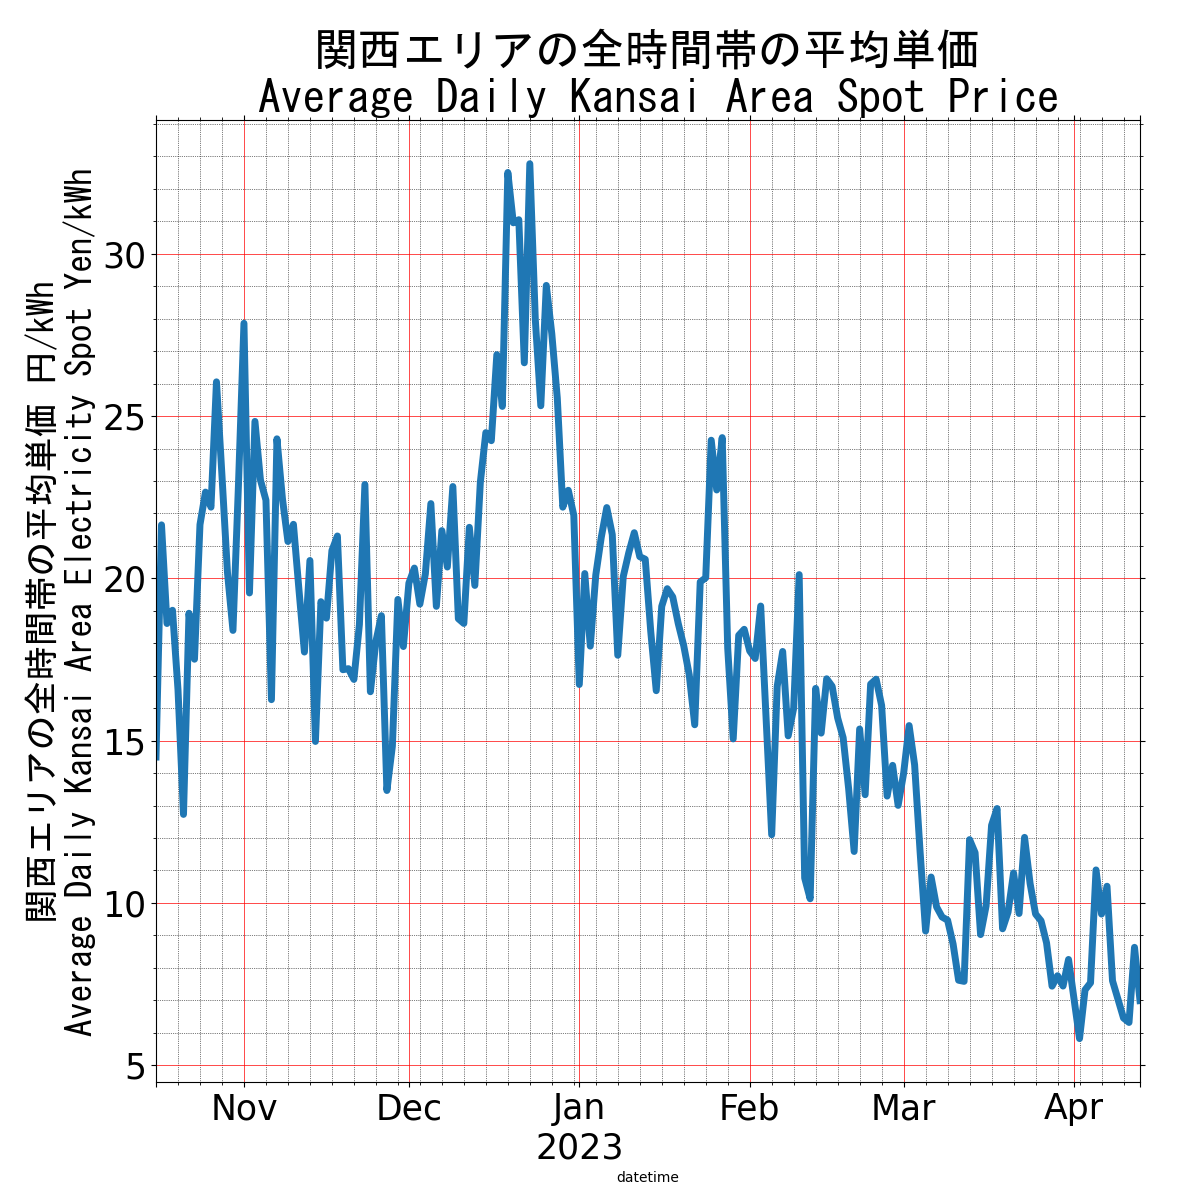 Japanese Electricity JEPX Kansai Area Price plotted over time for the last 90 days